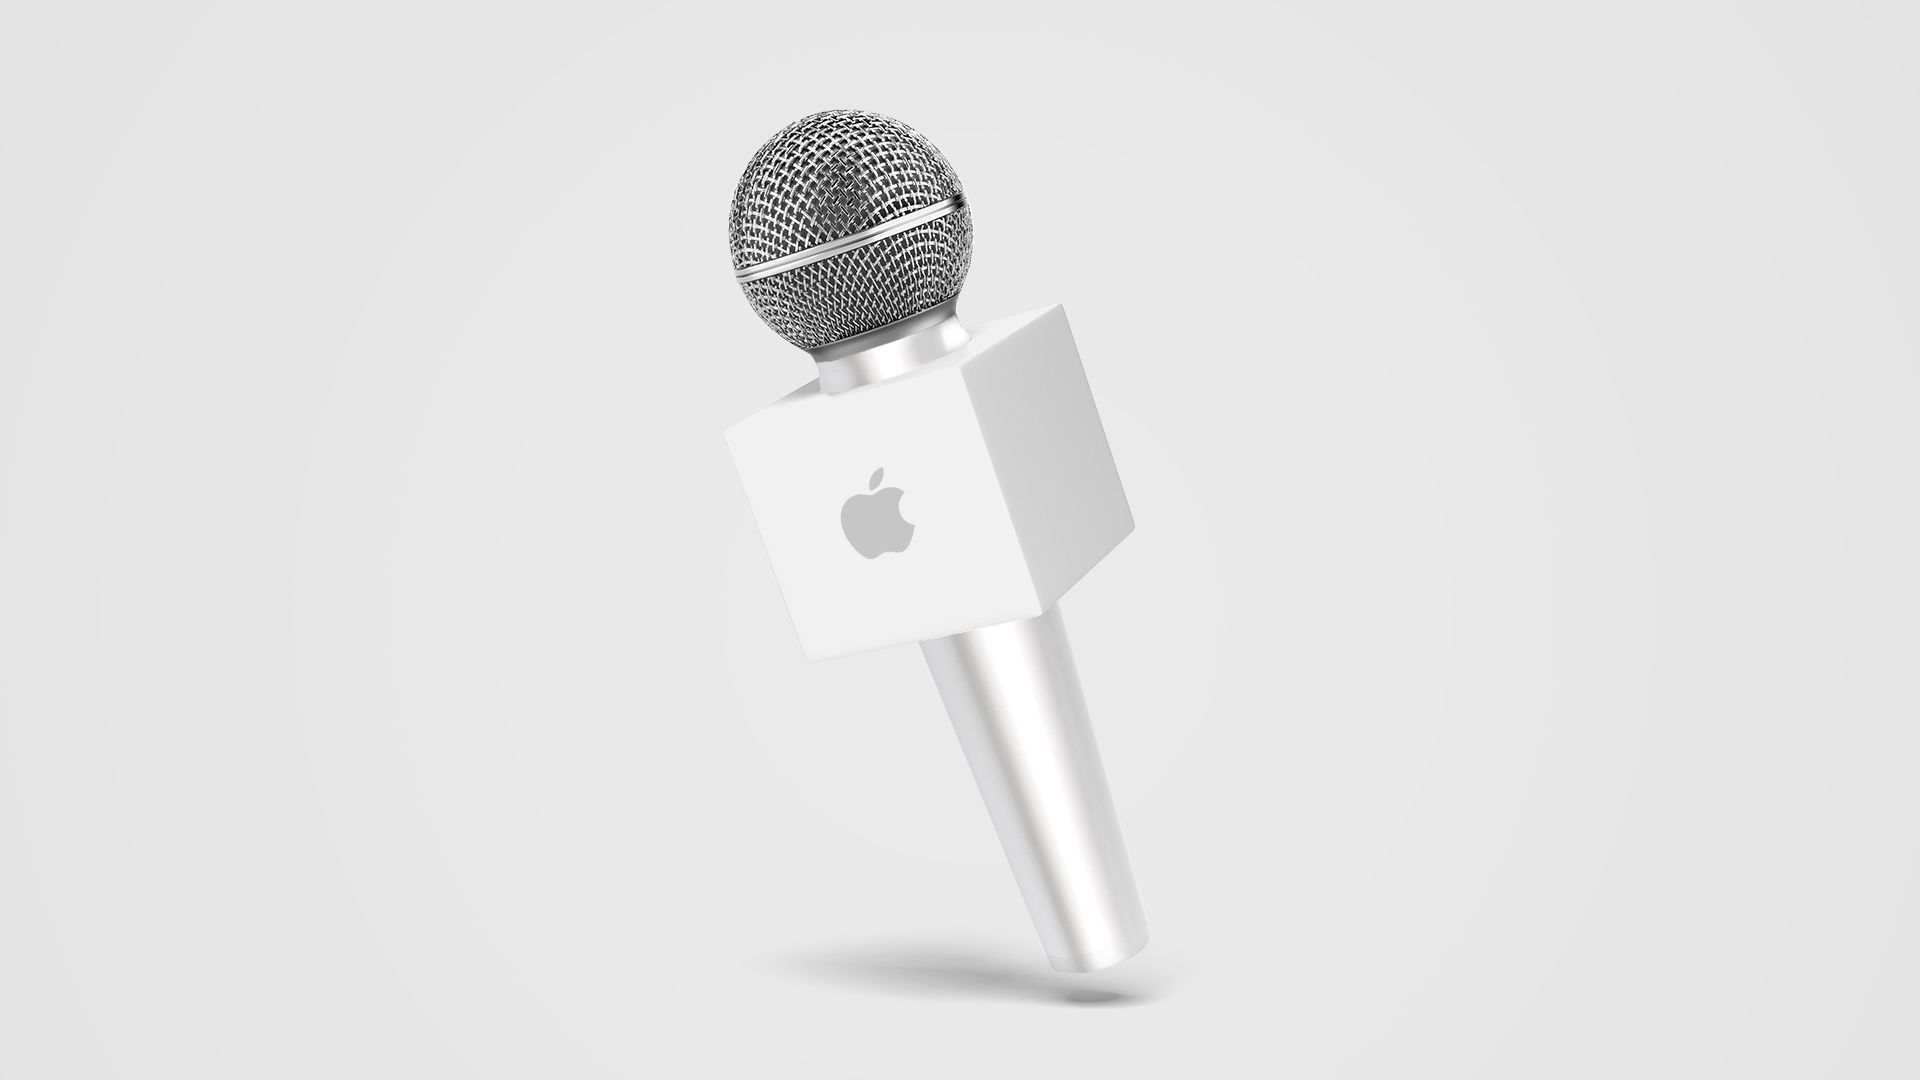 An illustration of a microphone with the Apple logo on it